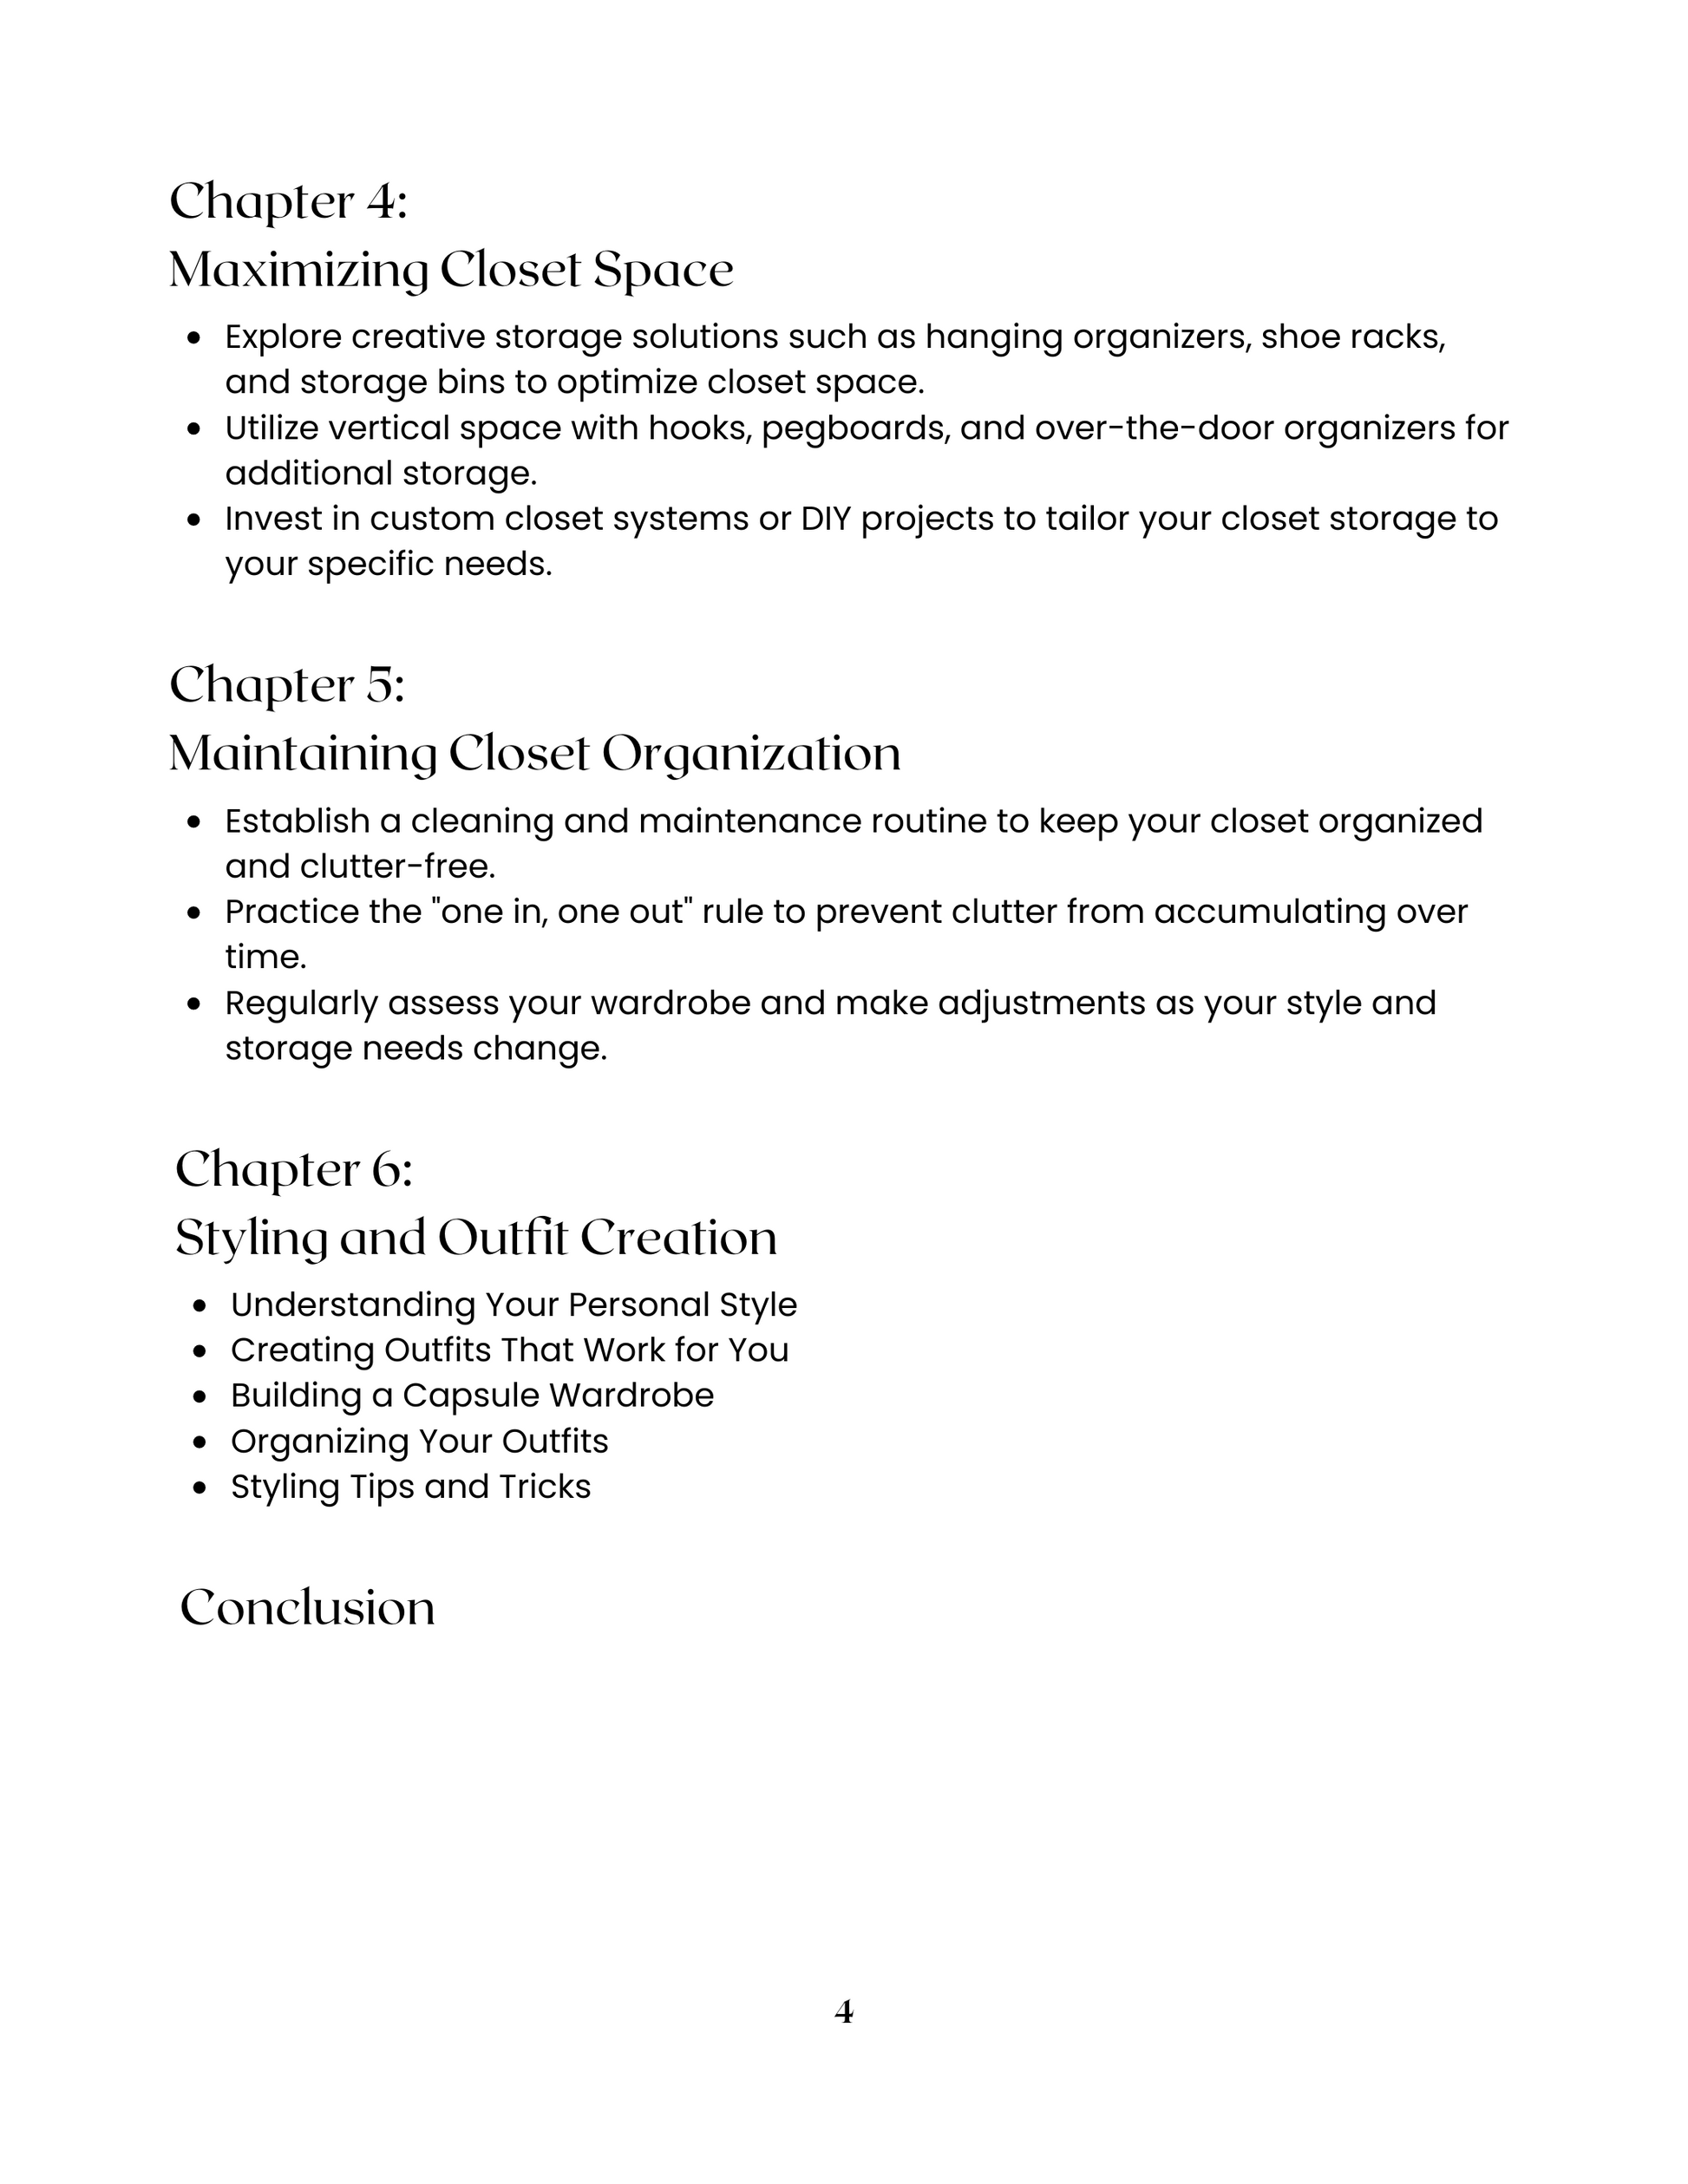 Contents page 2 for 'Closet Clarity: A Comprehensive Guide.' Declutter, organize, and style effortlessly. Say hello to closet confidence! Download now.